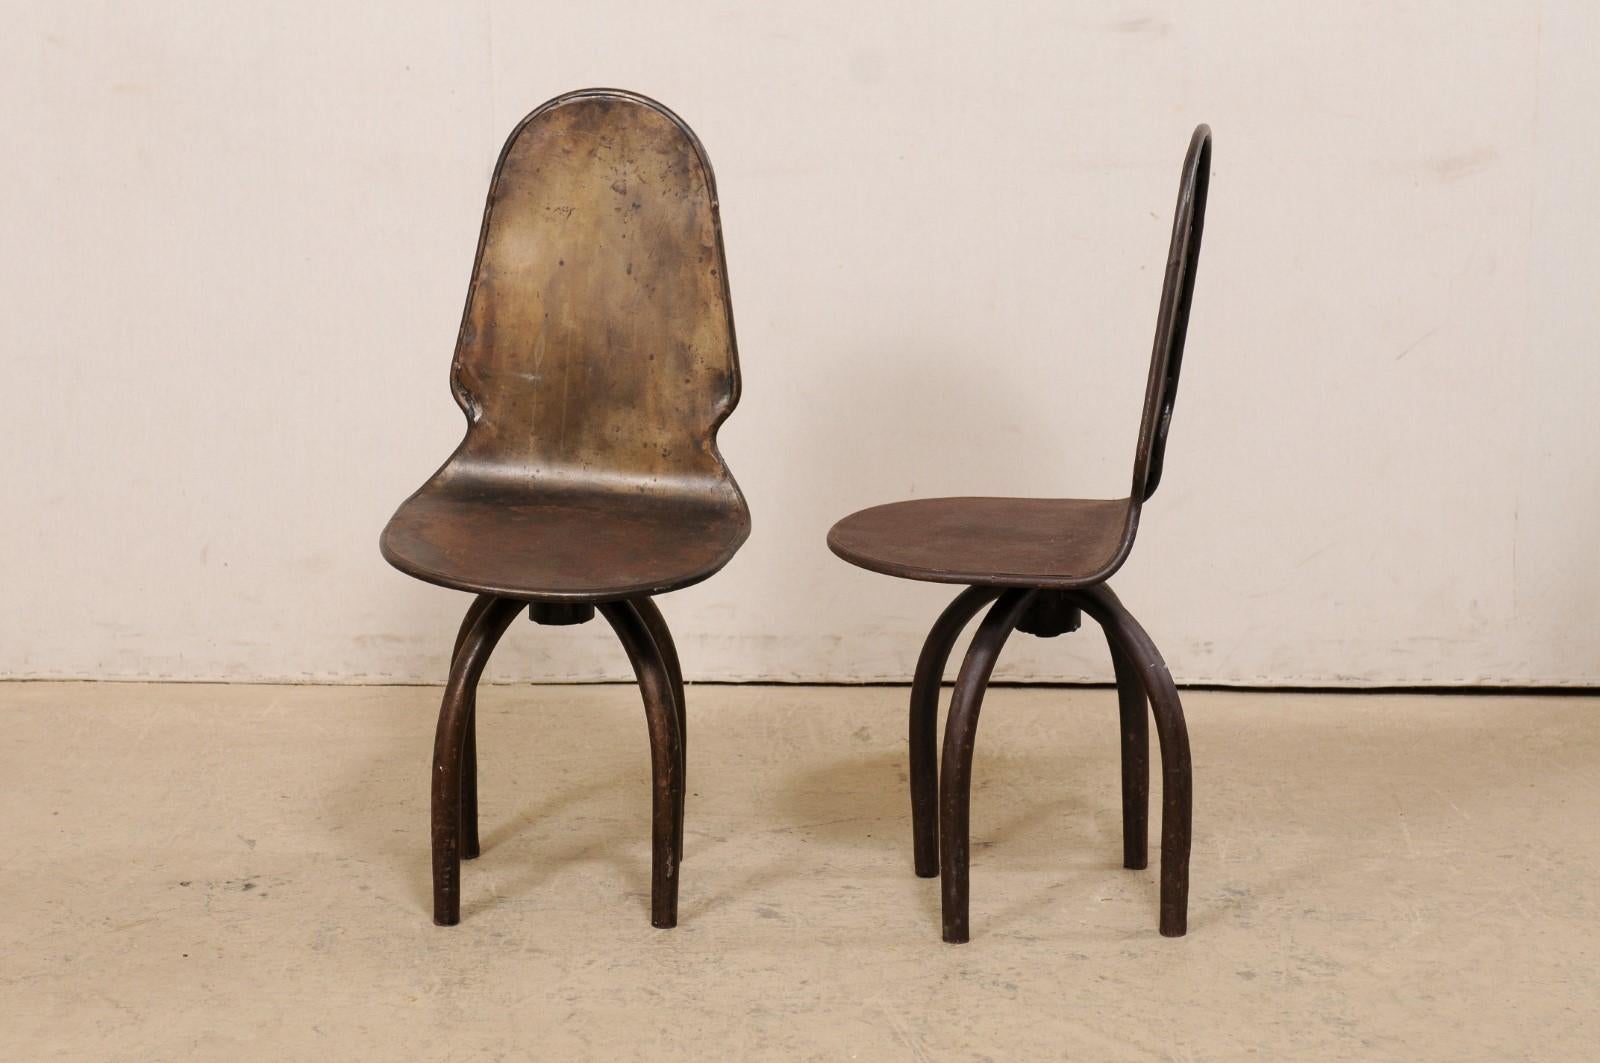 Spanish Pair of Iron Swivel Chairs on Spider-Style Legs, Industrial-Chic For Sale 1